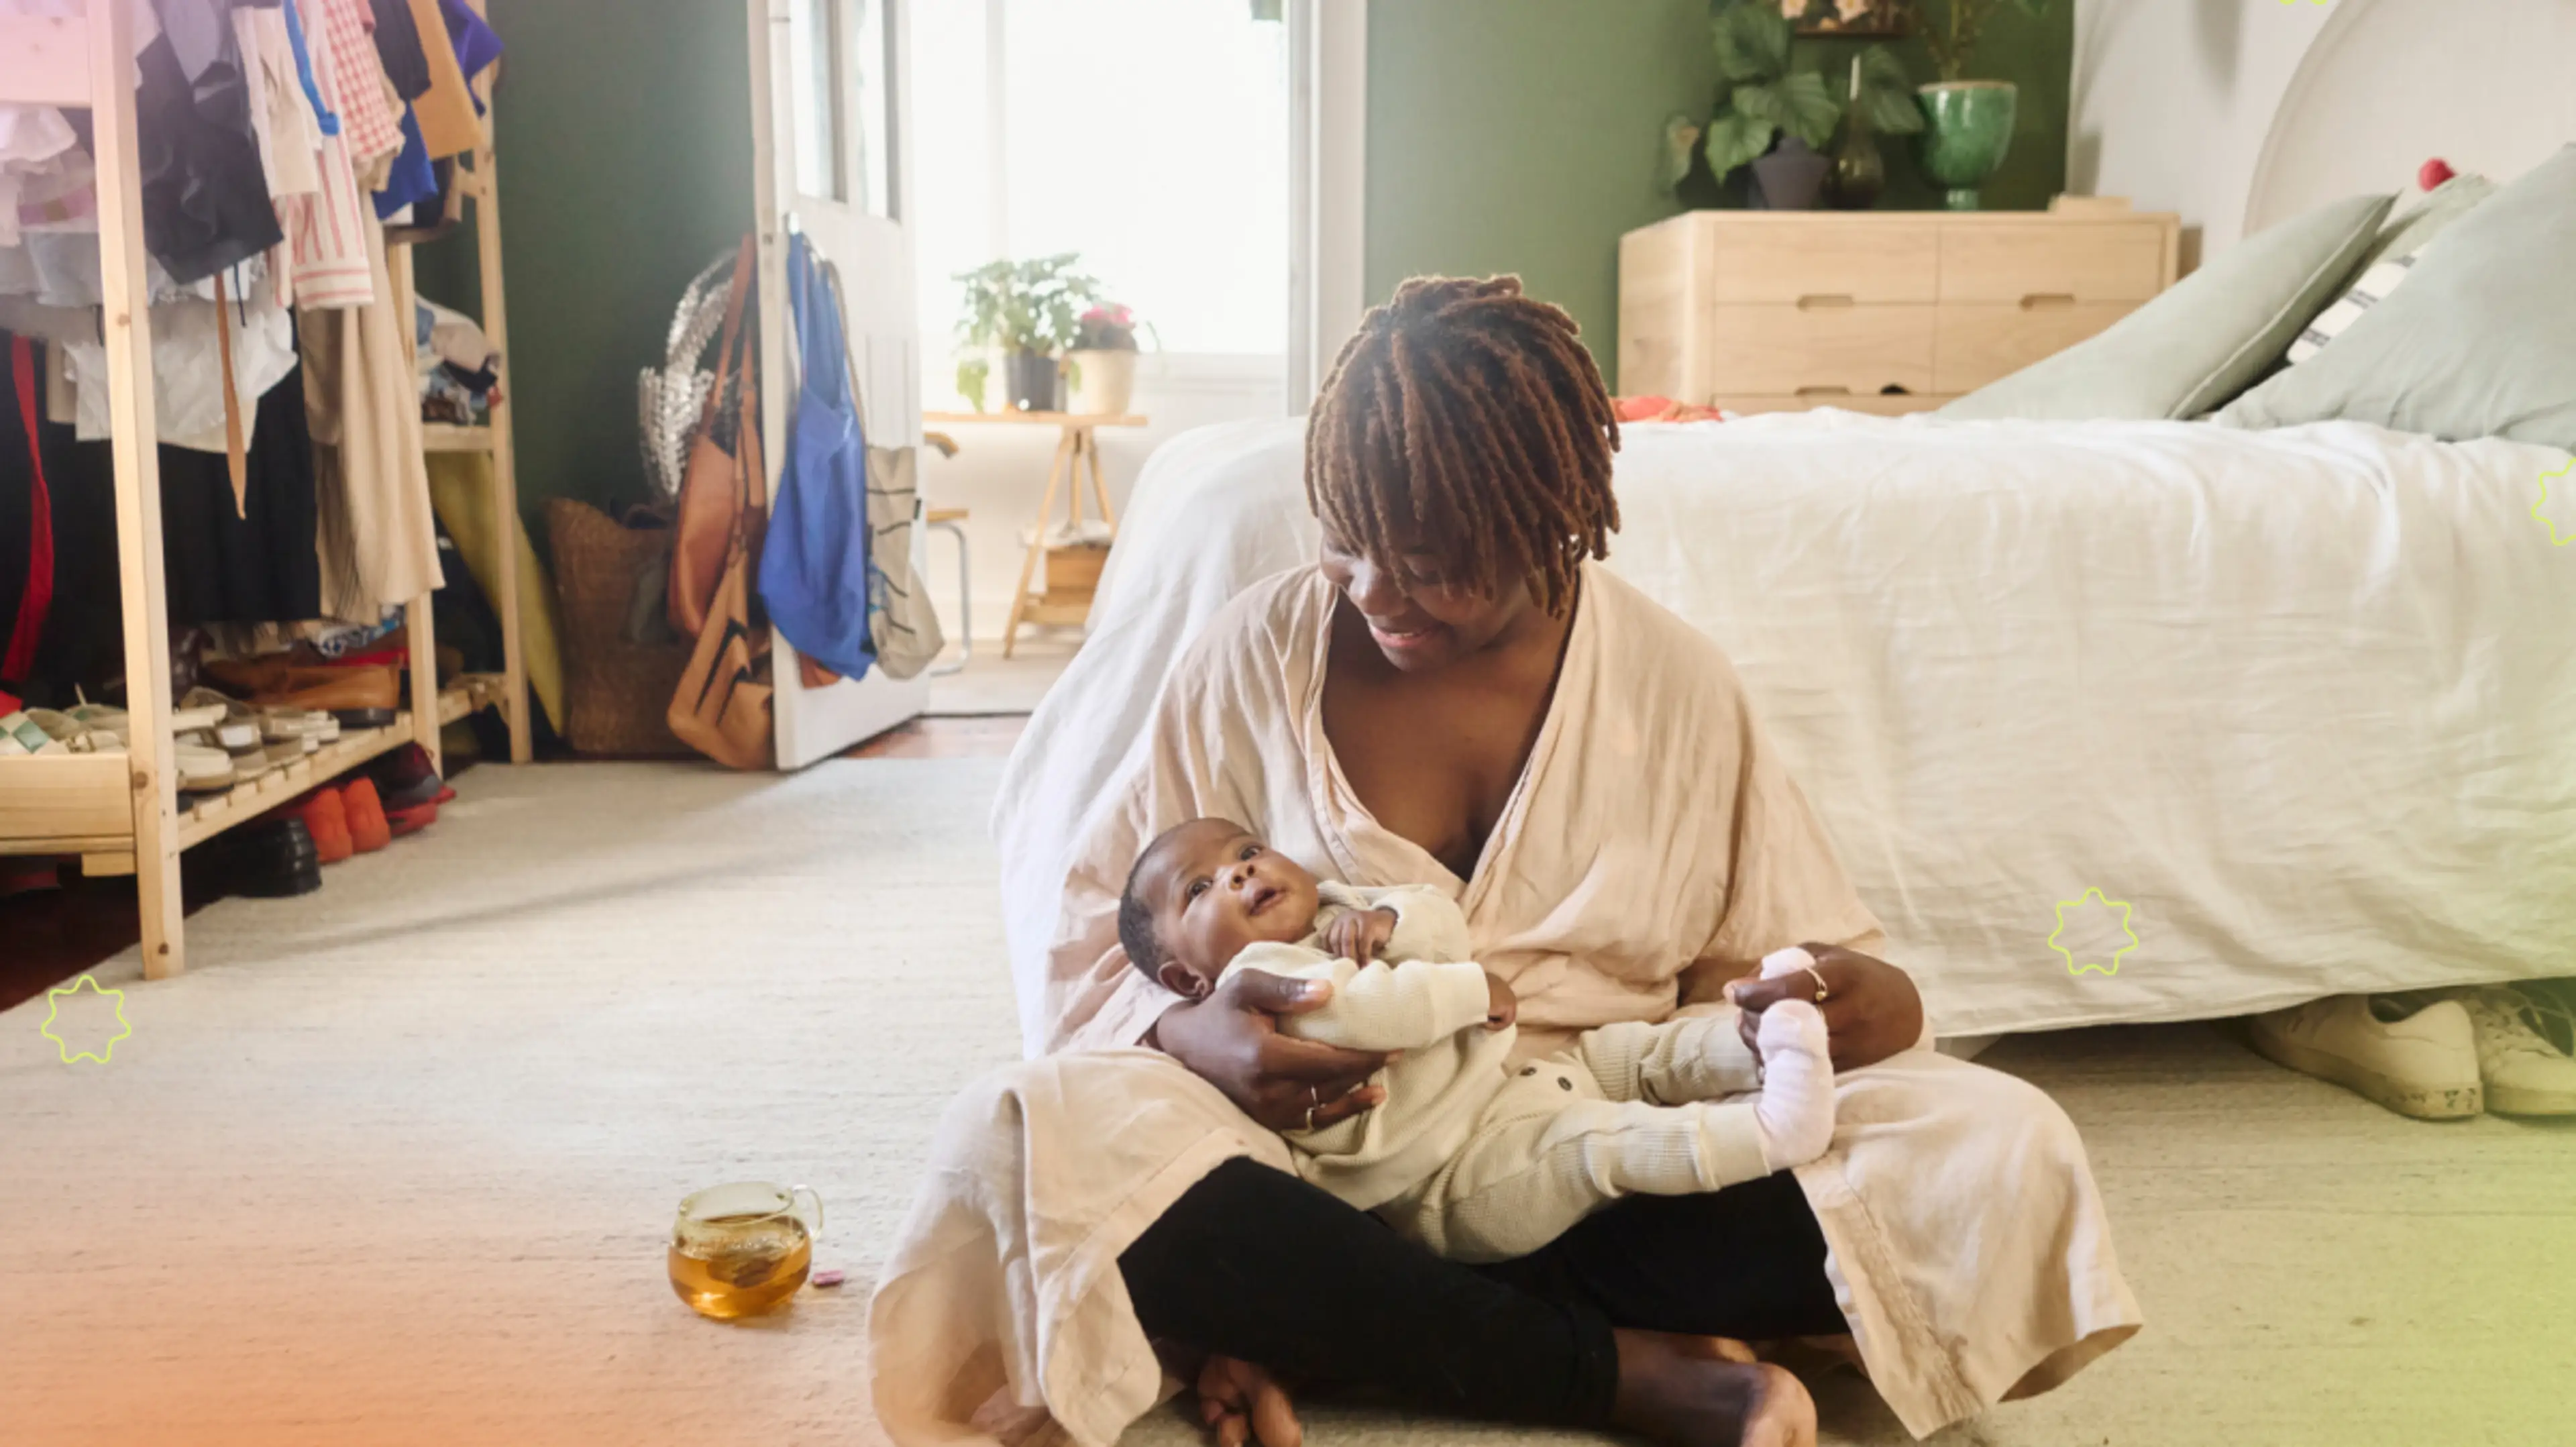 Does Motherhood Change You? It’s Complicated According to These Women